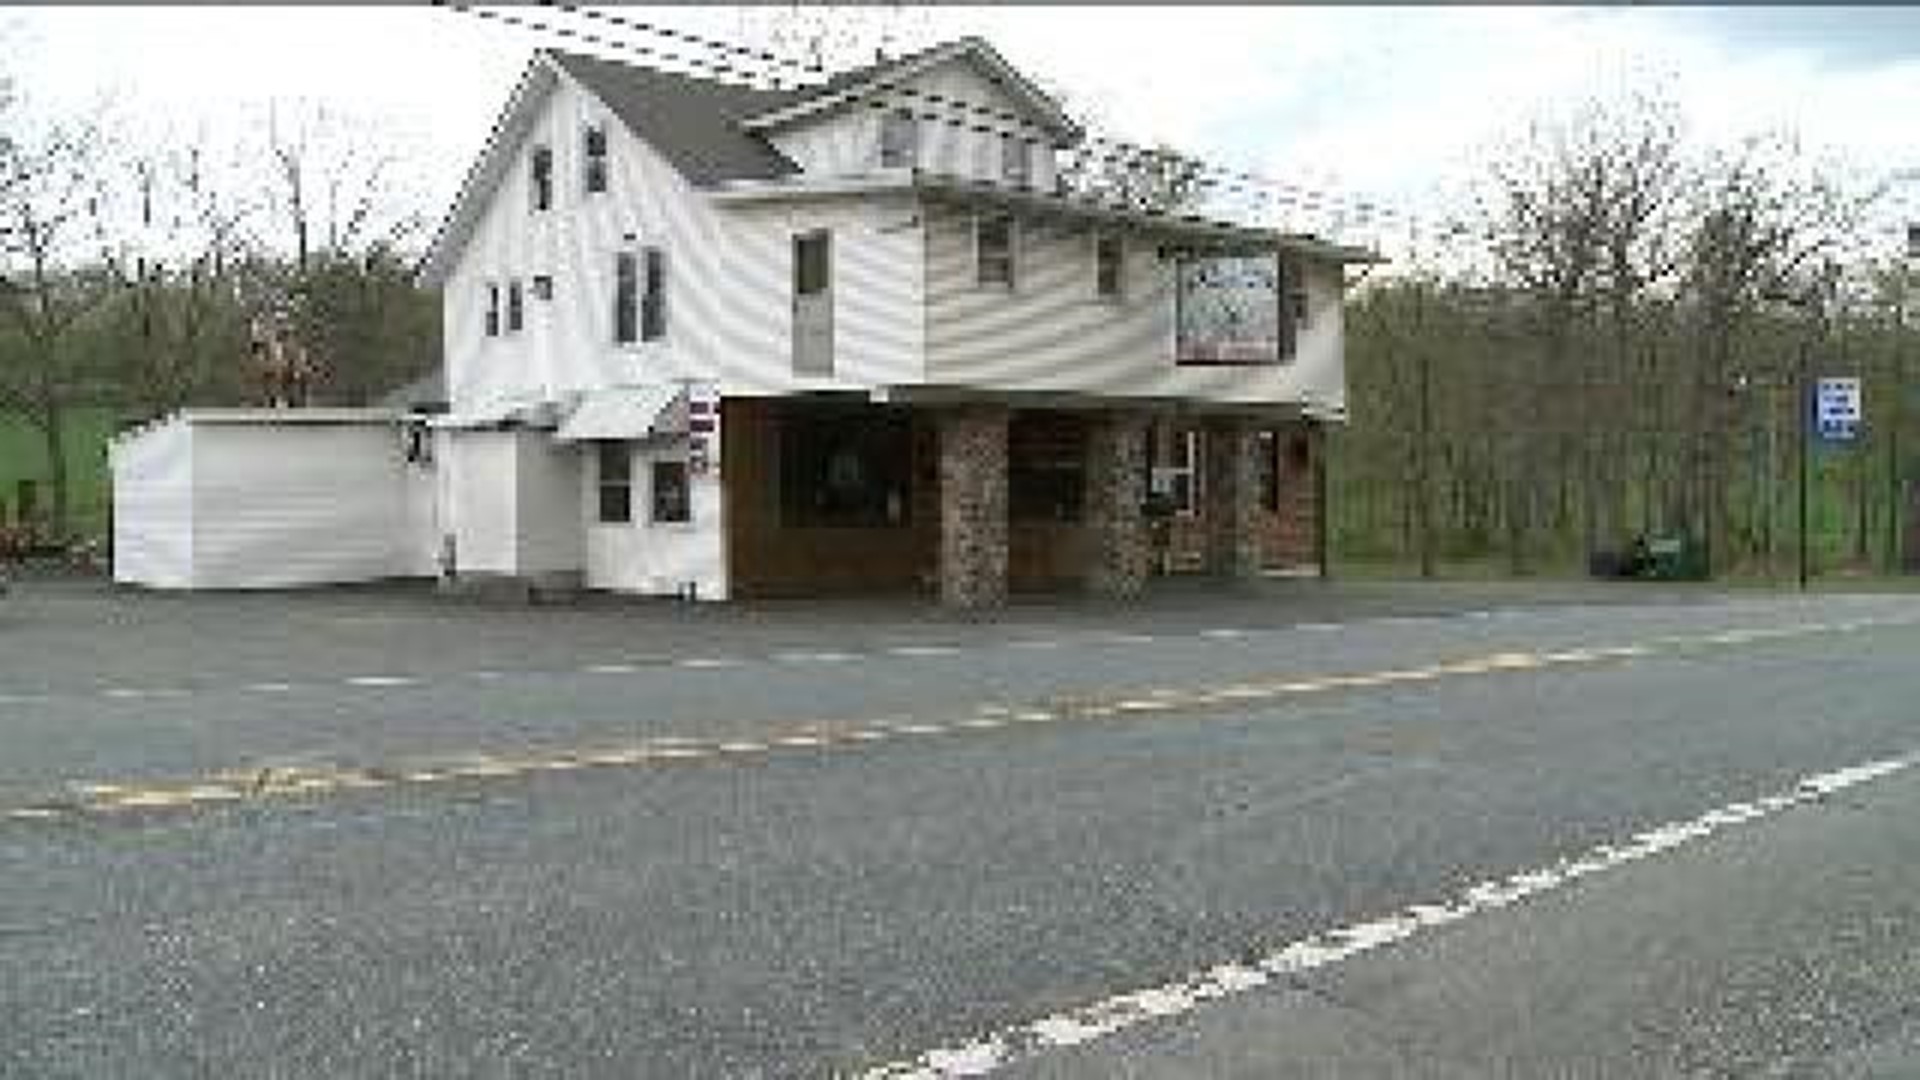 State Police Investigate Possible Hit-and-Run Outside Tavern